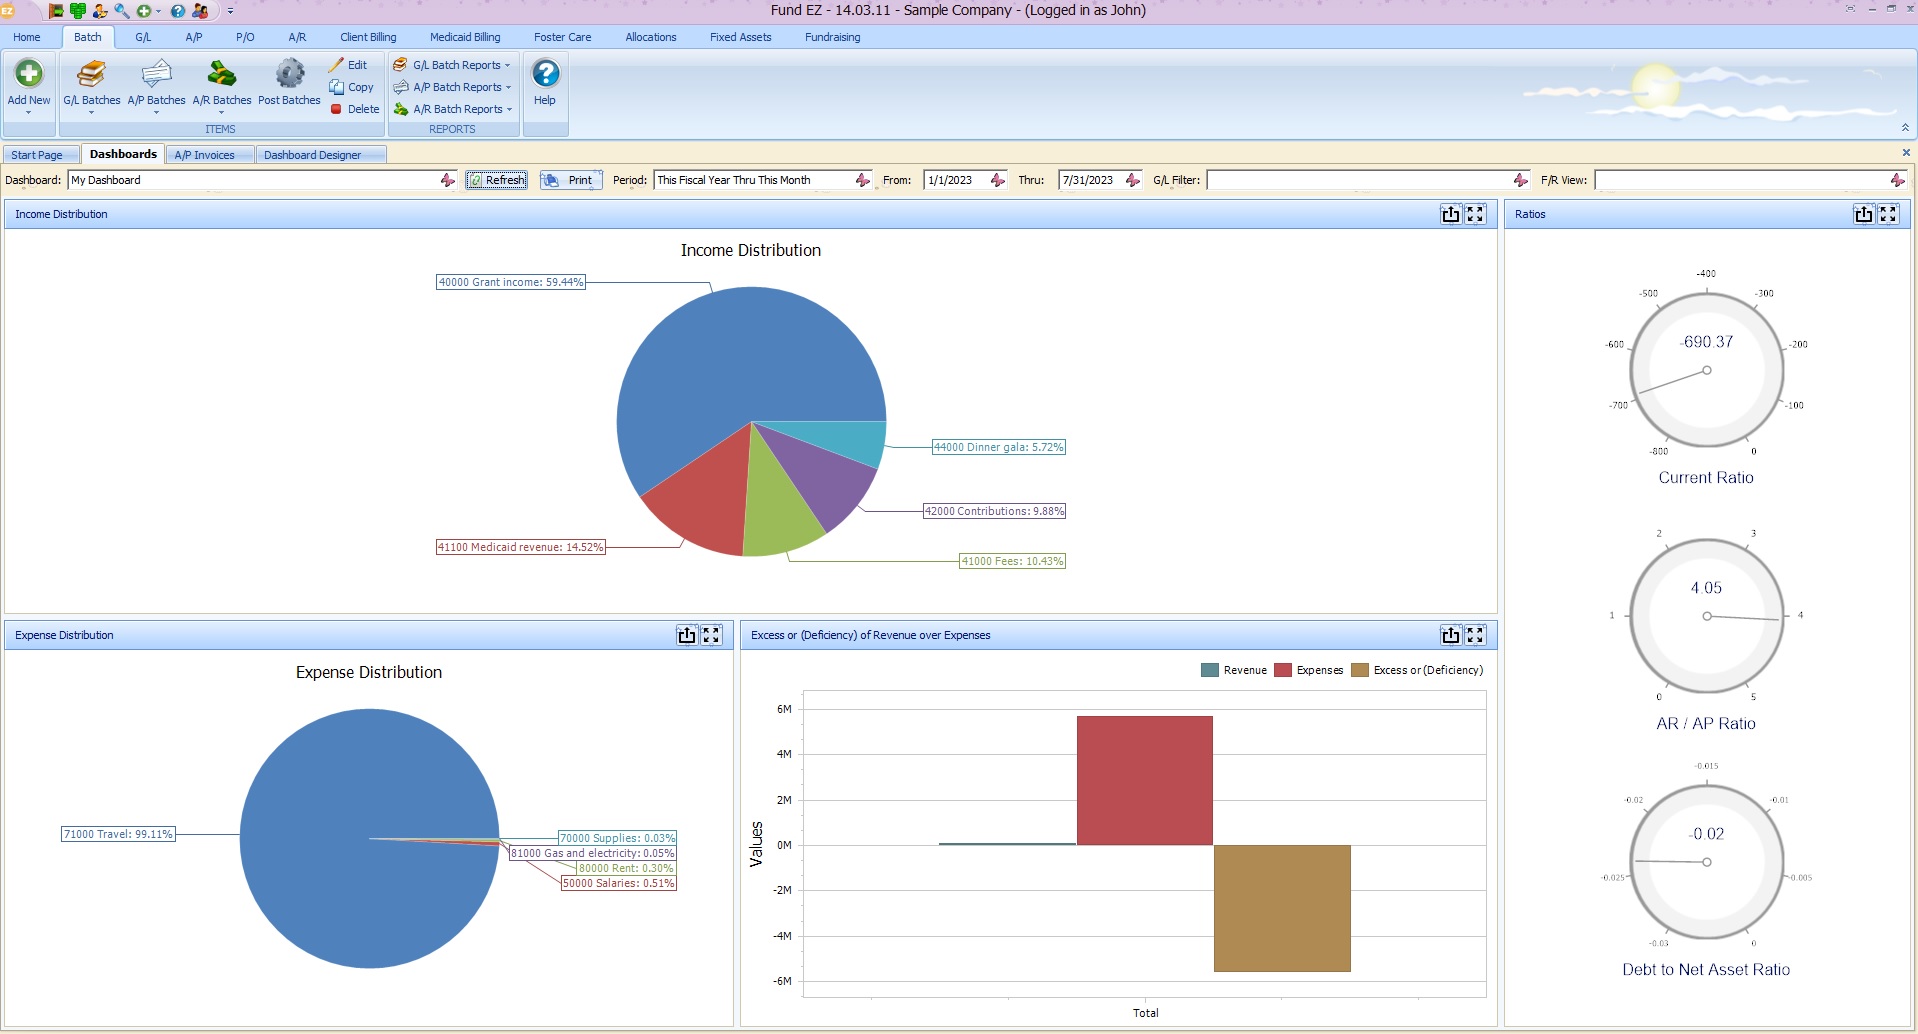 Custom-made dashboards personalized for each user.